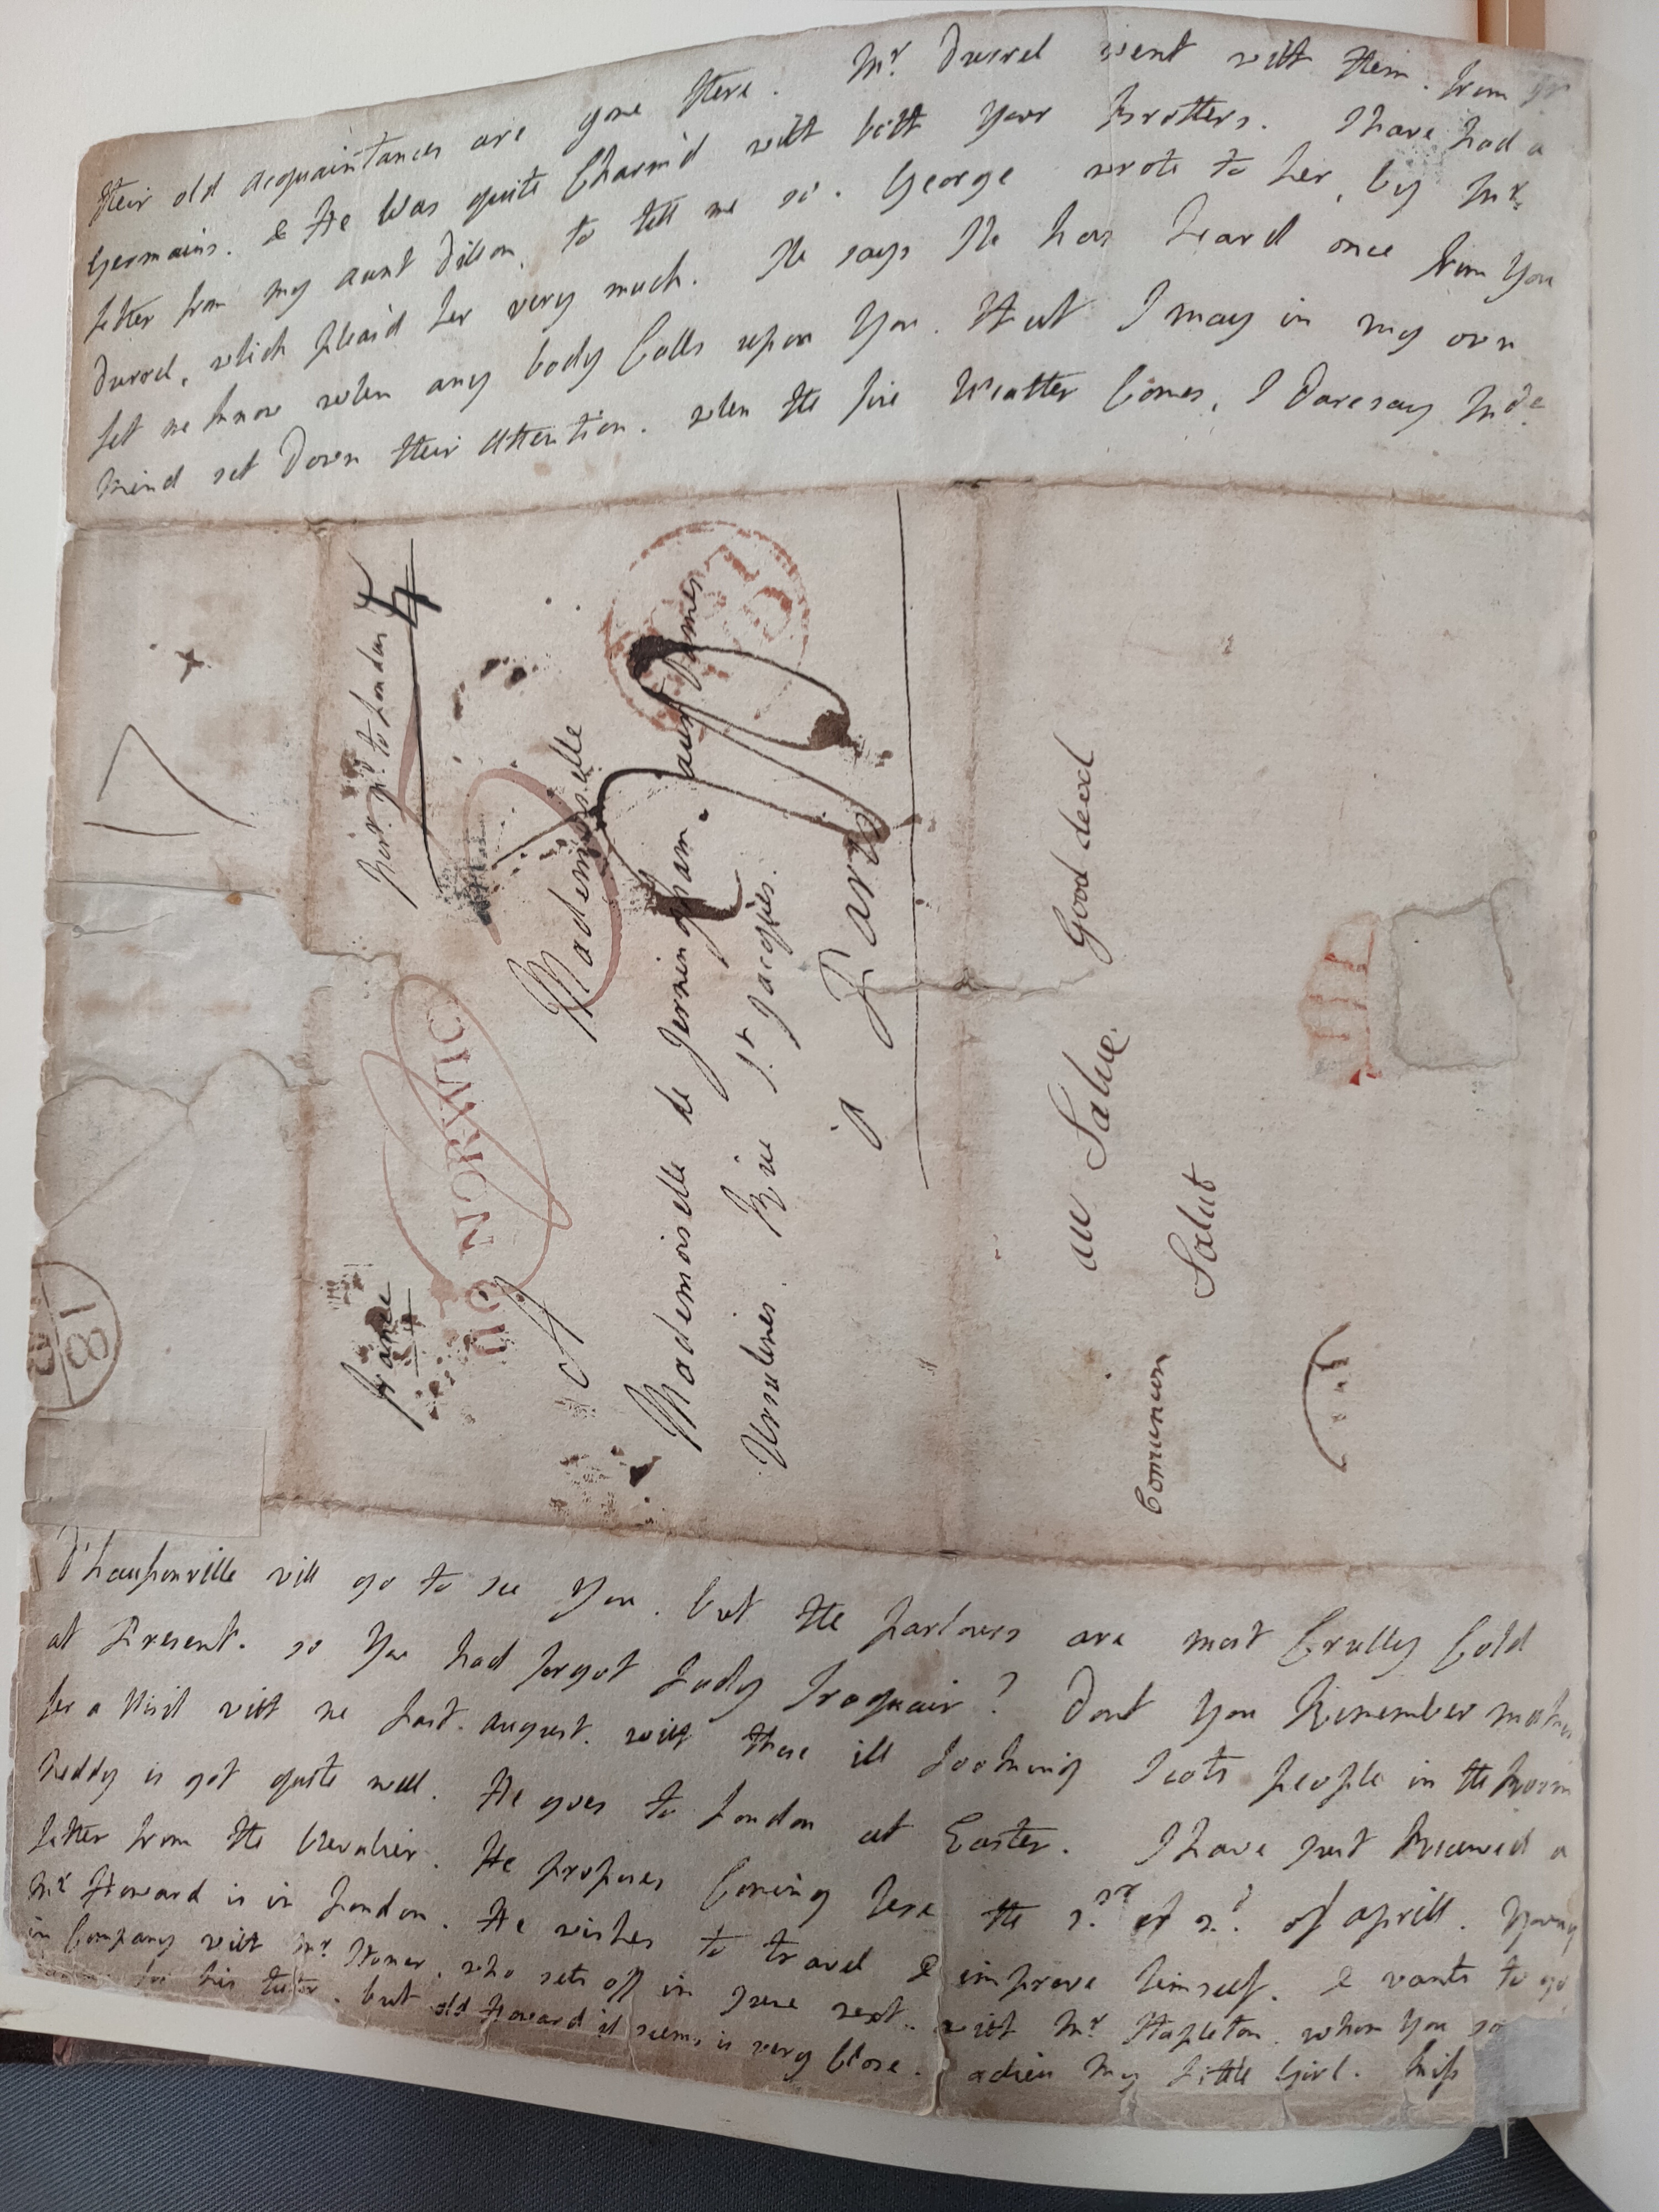 Image #4 of letter: Lady Jerningham to Charlotte, 15 March 1785